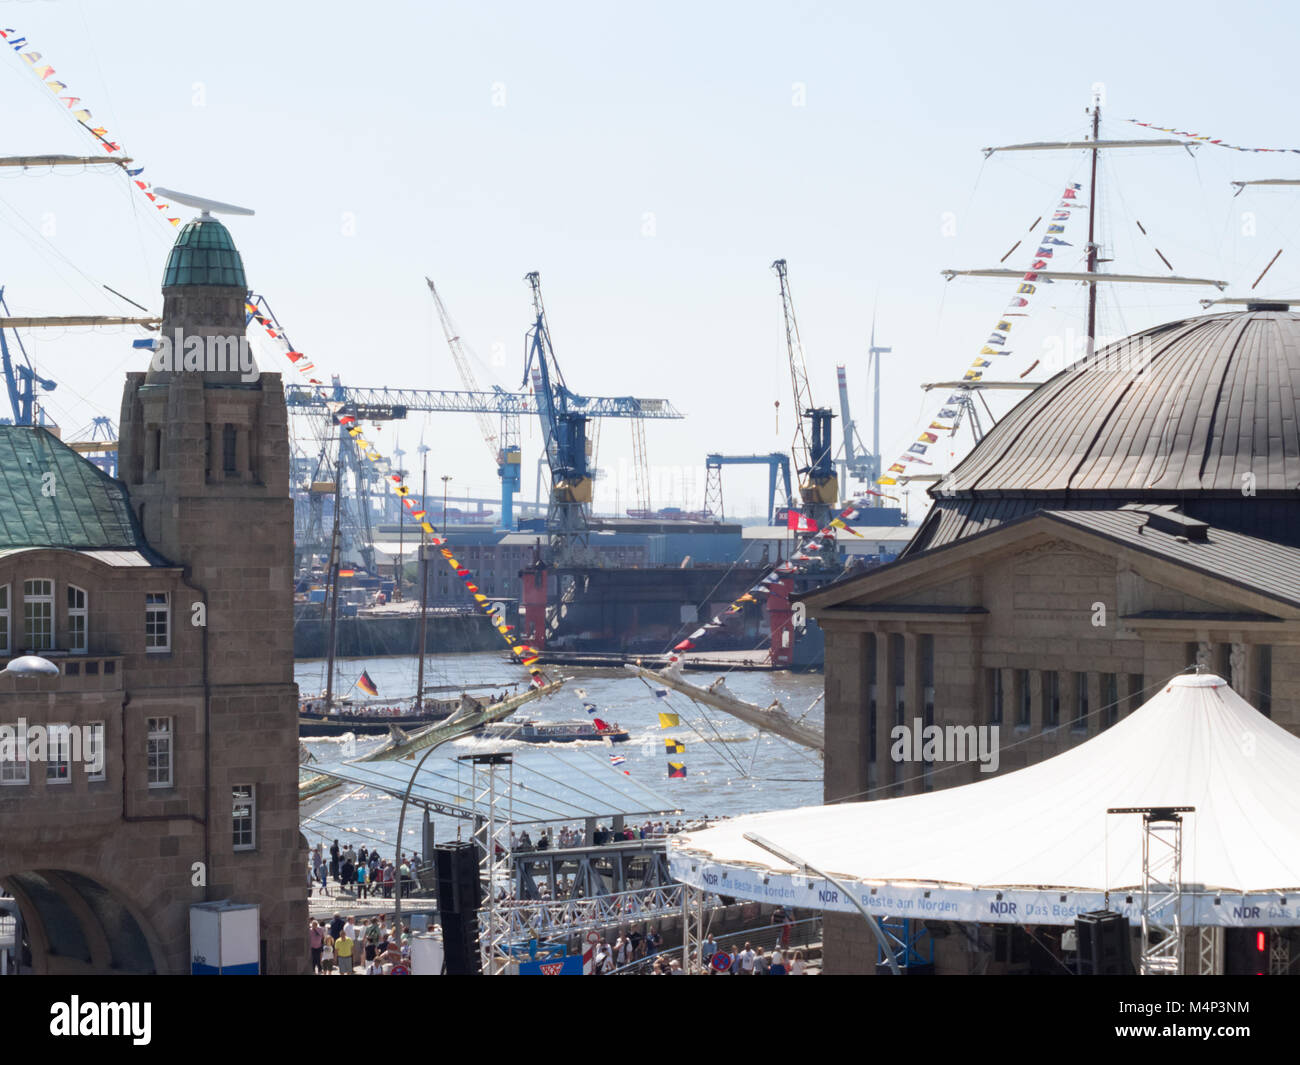 Hamburg, Germany - May 07, 2016: During the harbour's birthday , there are a lot of decorative waving flags and pennants. Stock Photo